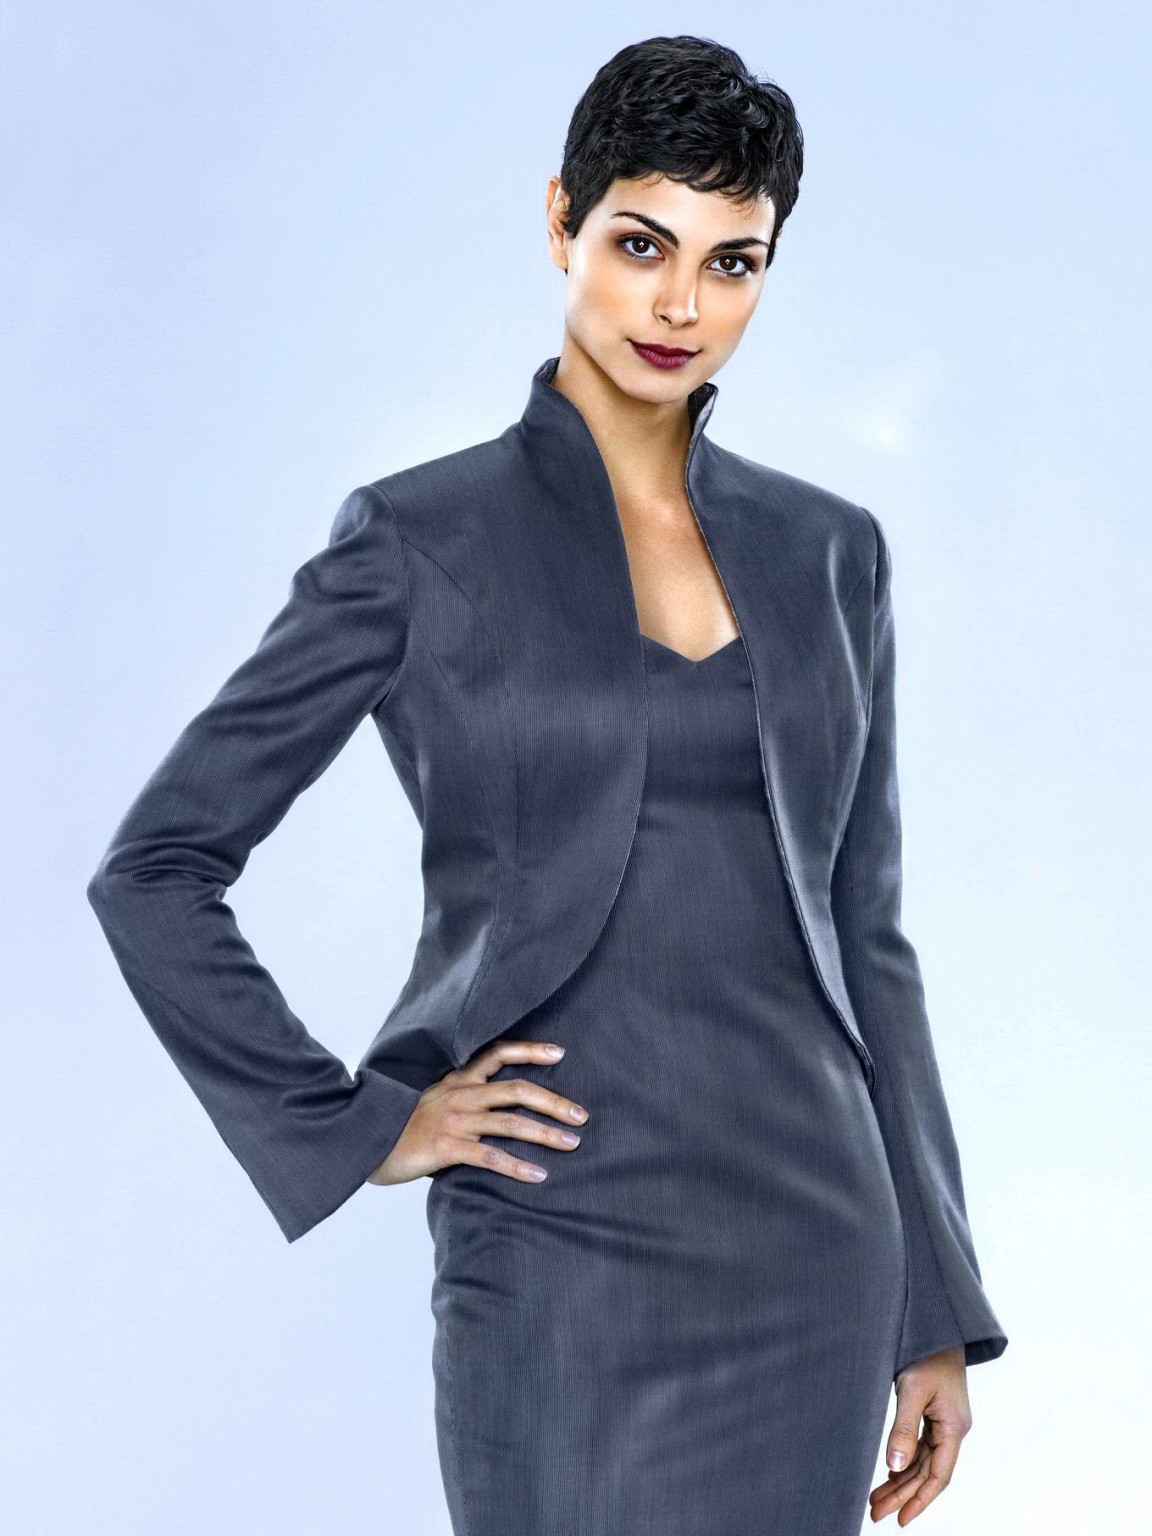 Morena Baccarin looking very hot in the V promotional shoot #75195033